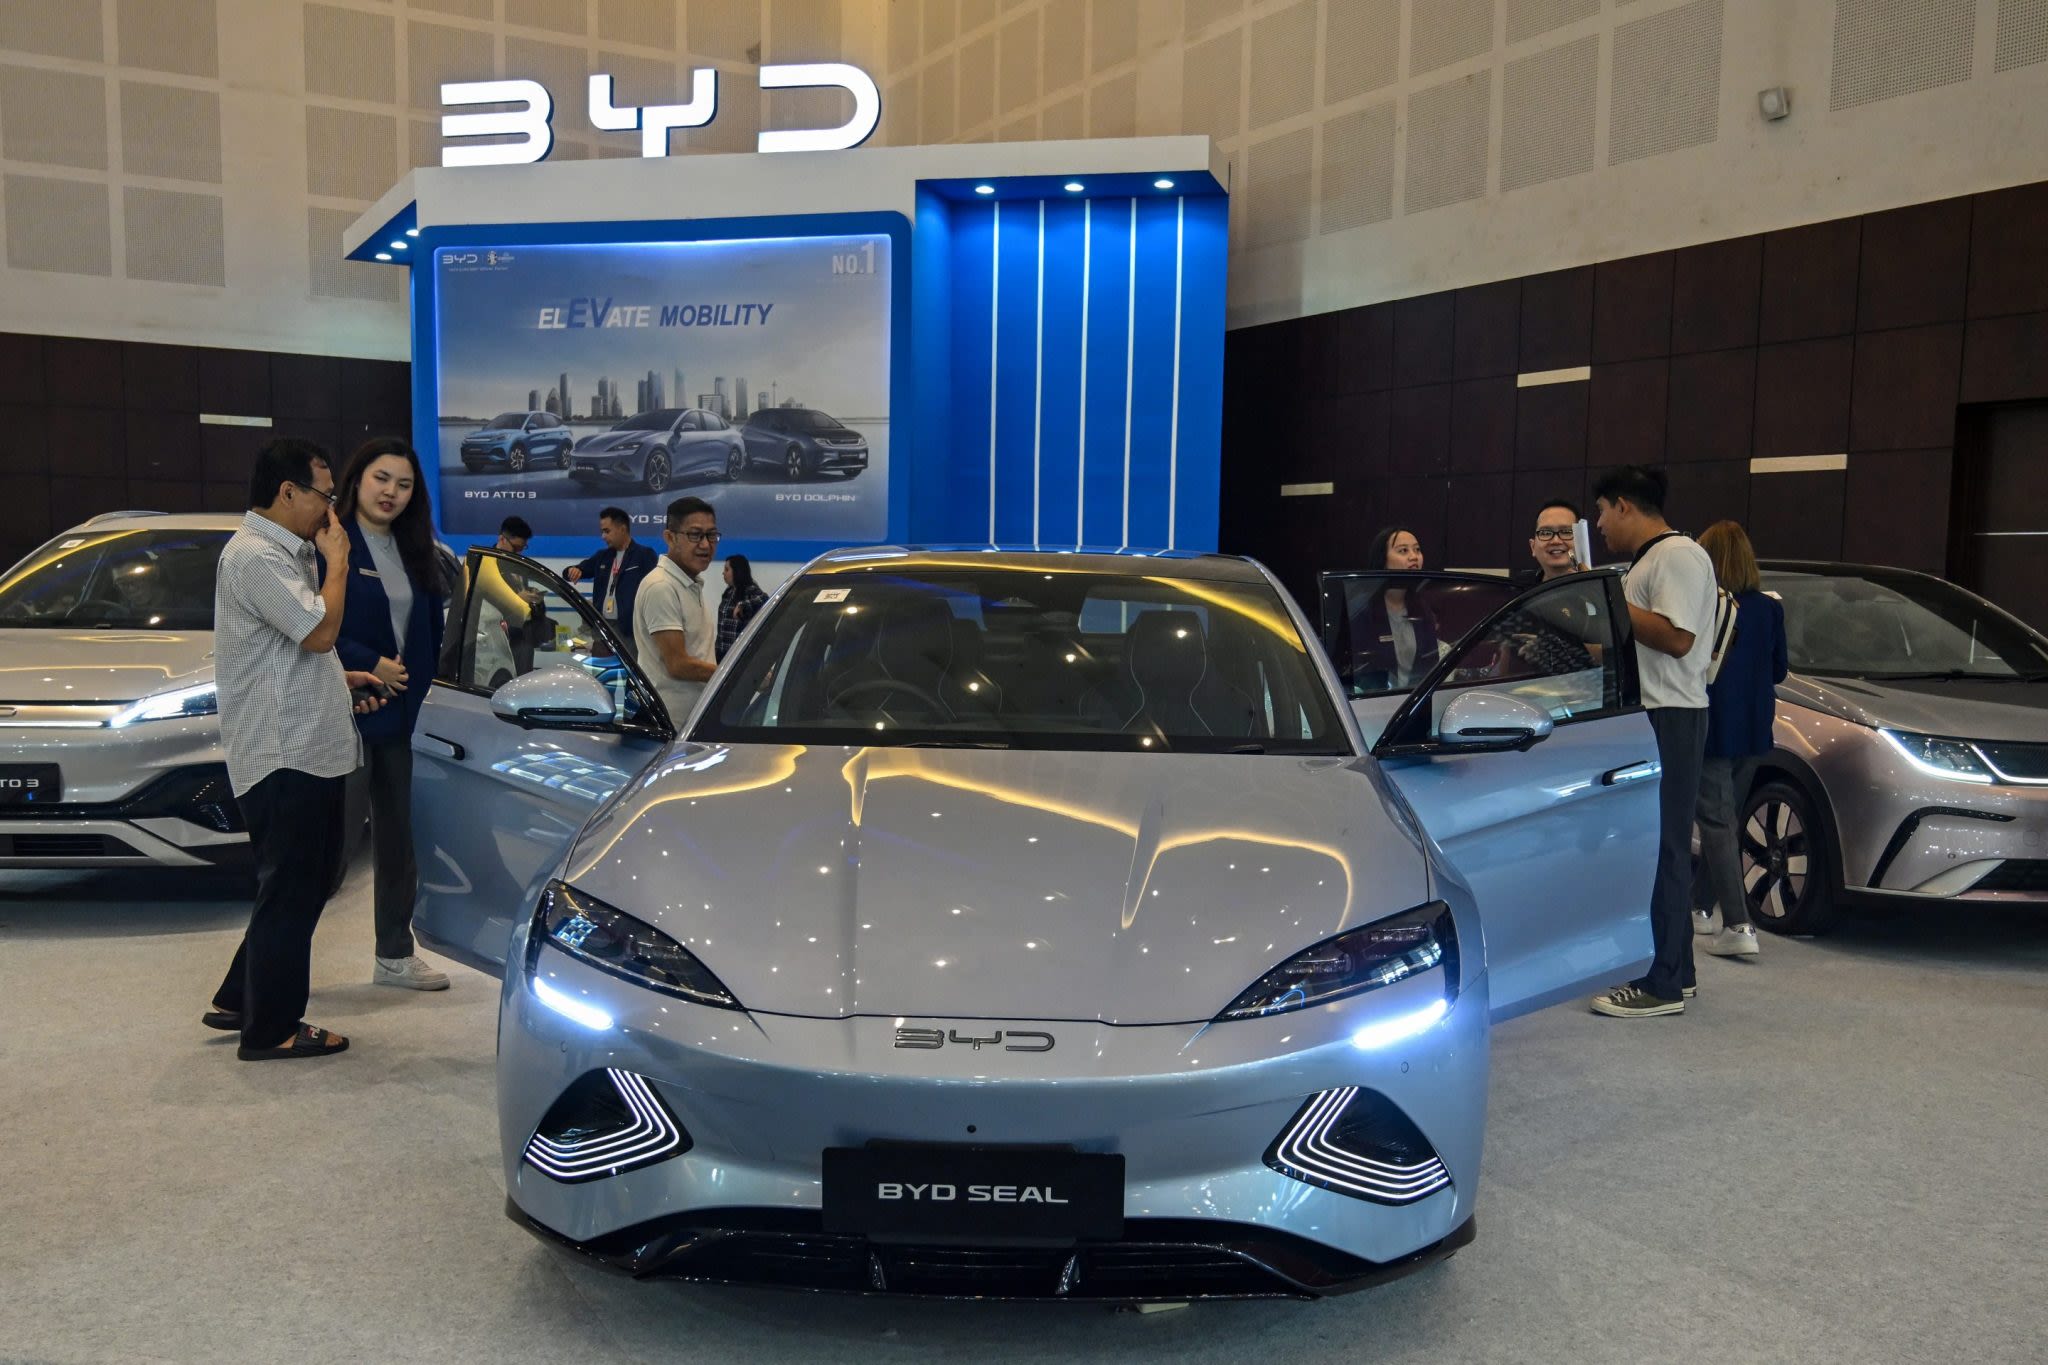 Porsche and Ferrari sales slump in China as car buyers flock to EVs instead